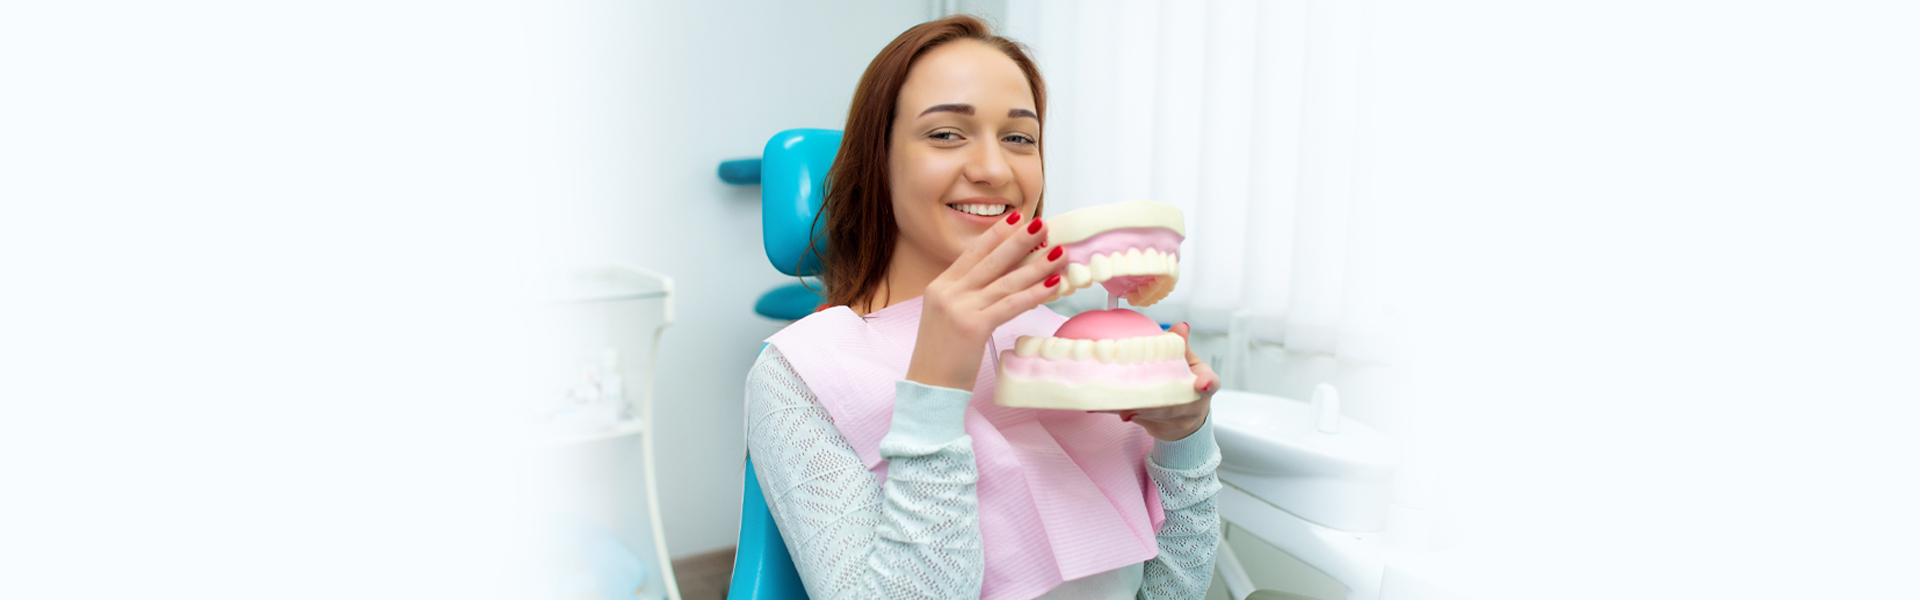 How Can I Cover My Missing Teeth While Waiting for an Implant?